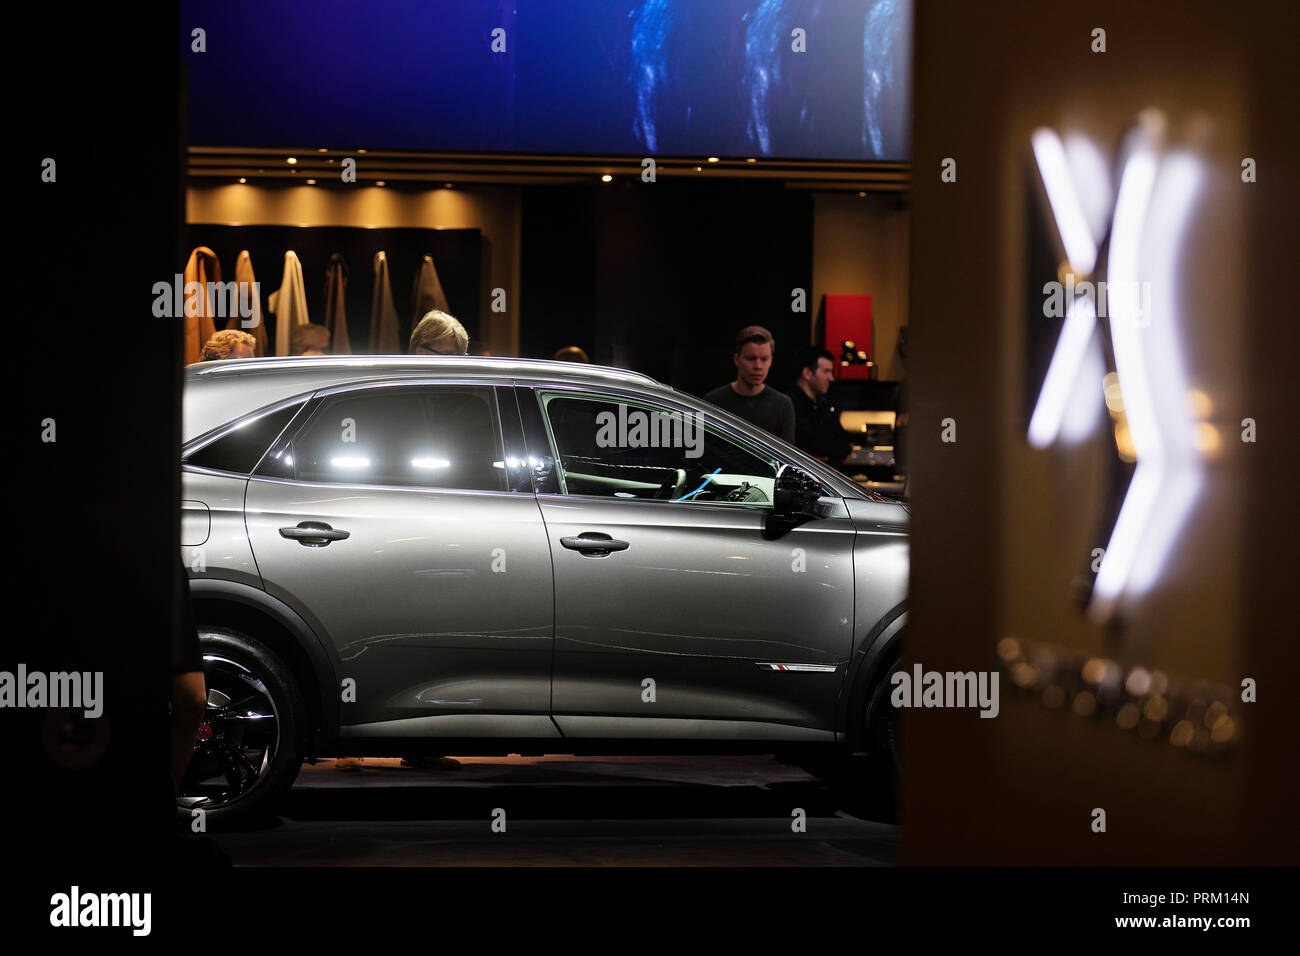 DS carmaker stand with DS7 Crossback showcar during the second day of International Paris Motorshow on Wednesday, October 3rd, 2018 in Paris, France. Stock Photo